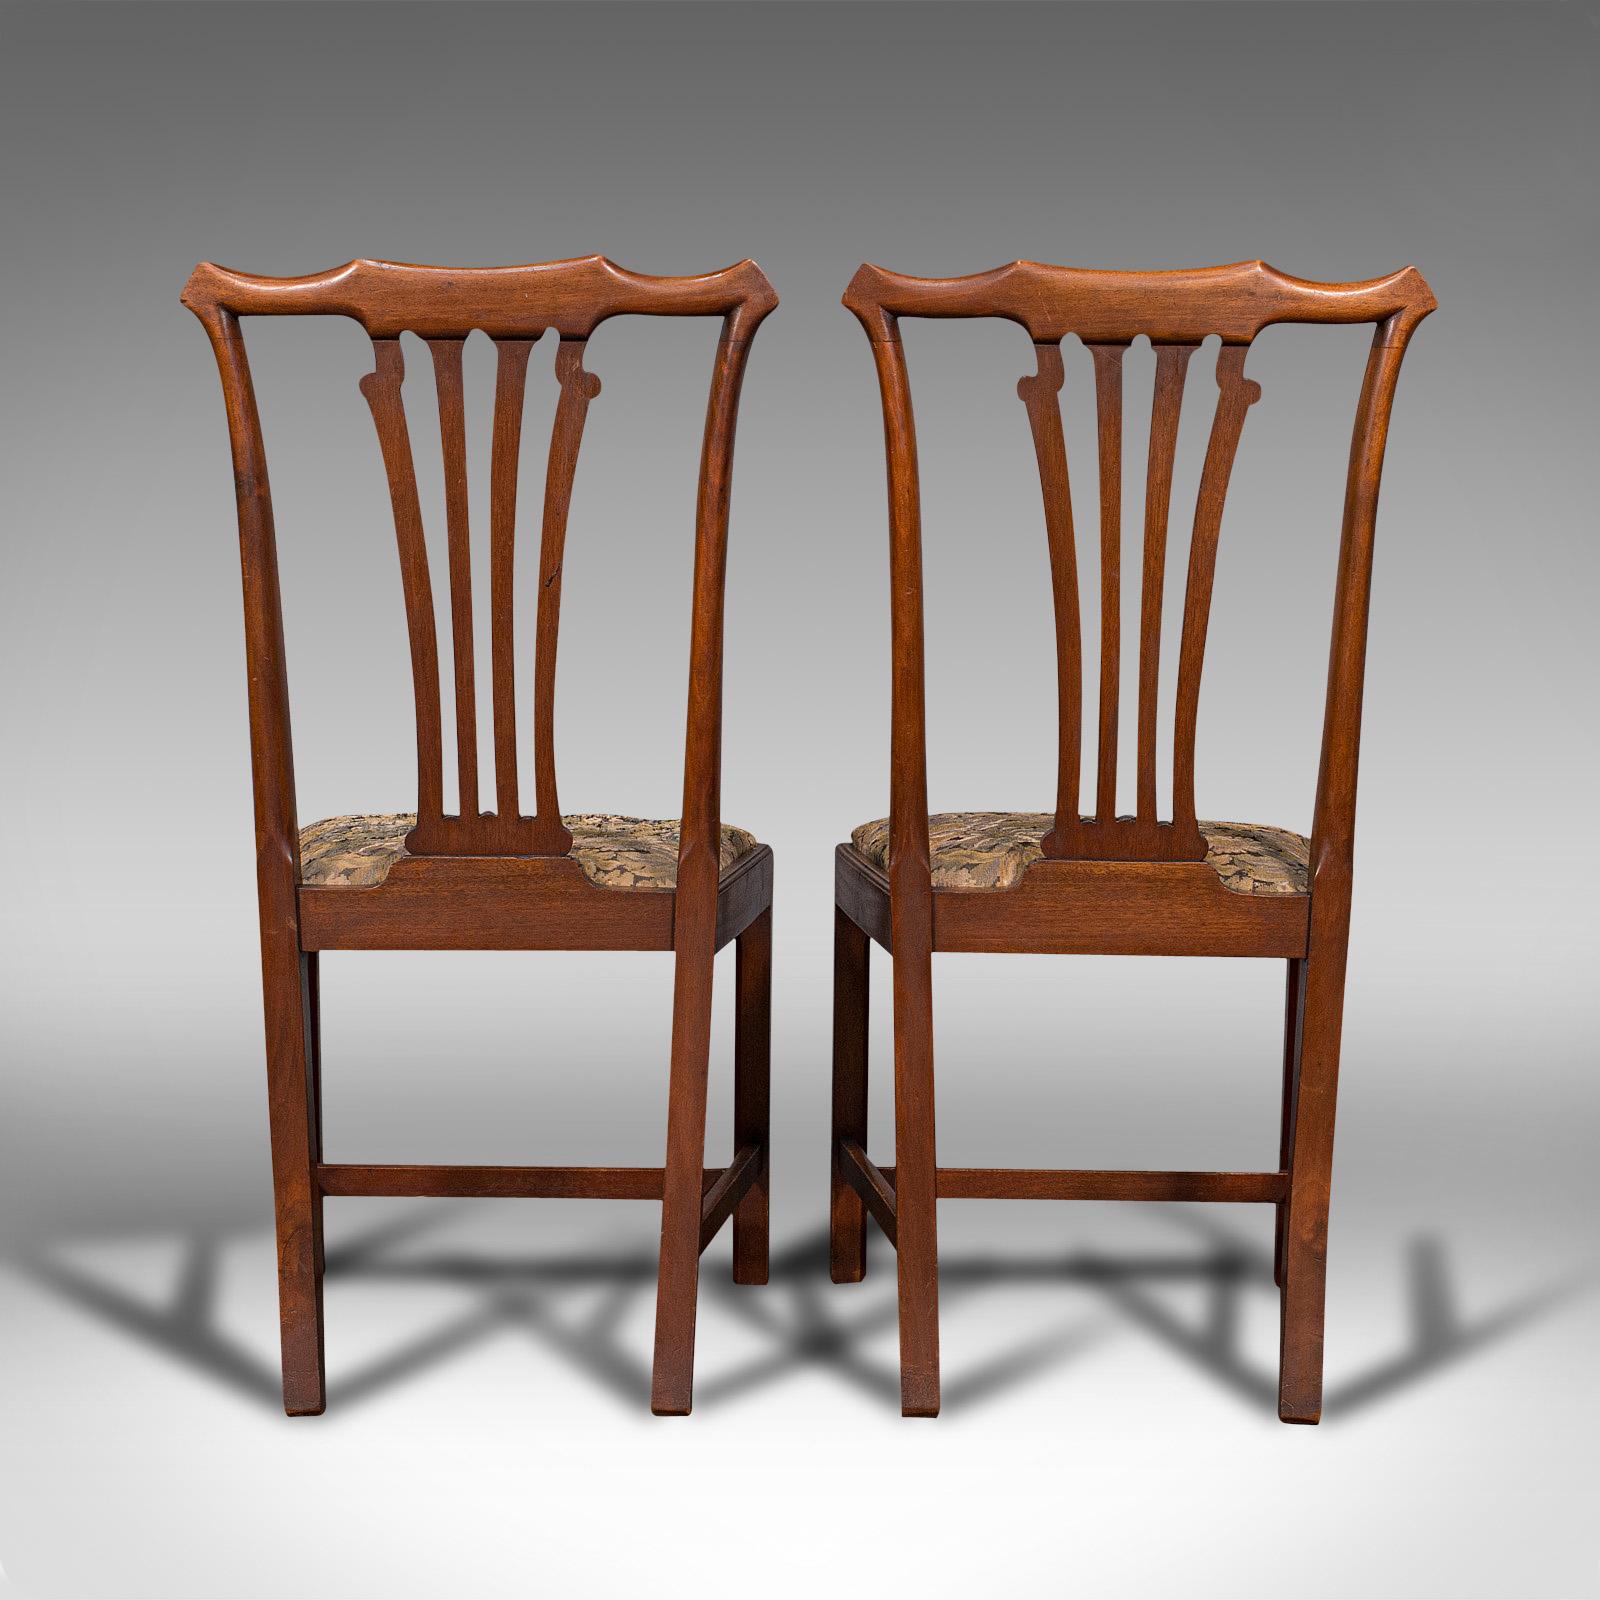 19th Century Pair of Antique Side Chairs, Mahogany, Hall, Dining Seat, Victorian, Circa 1900